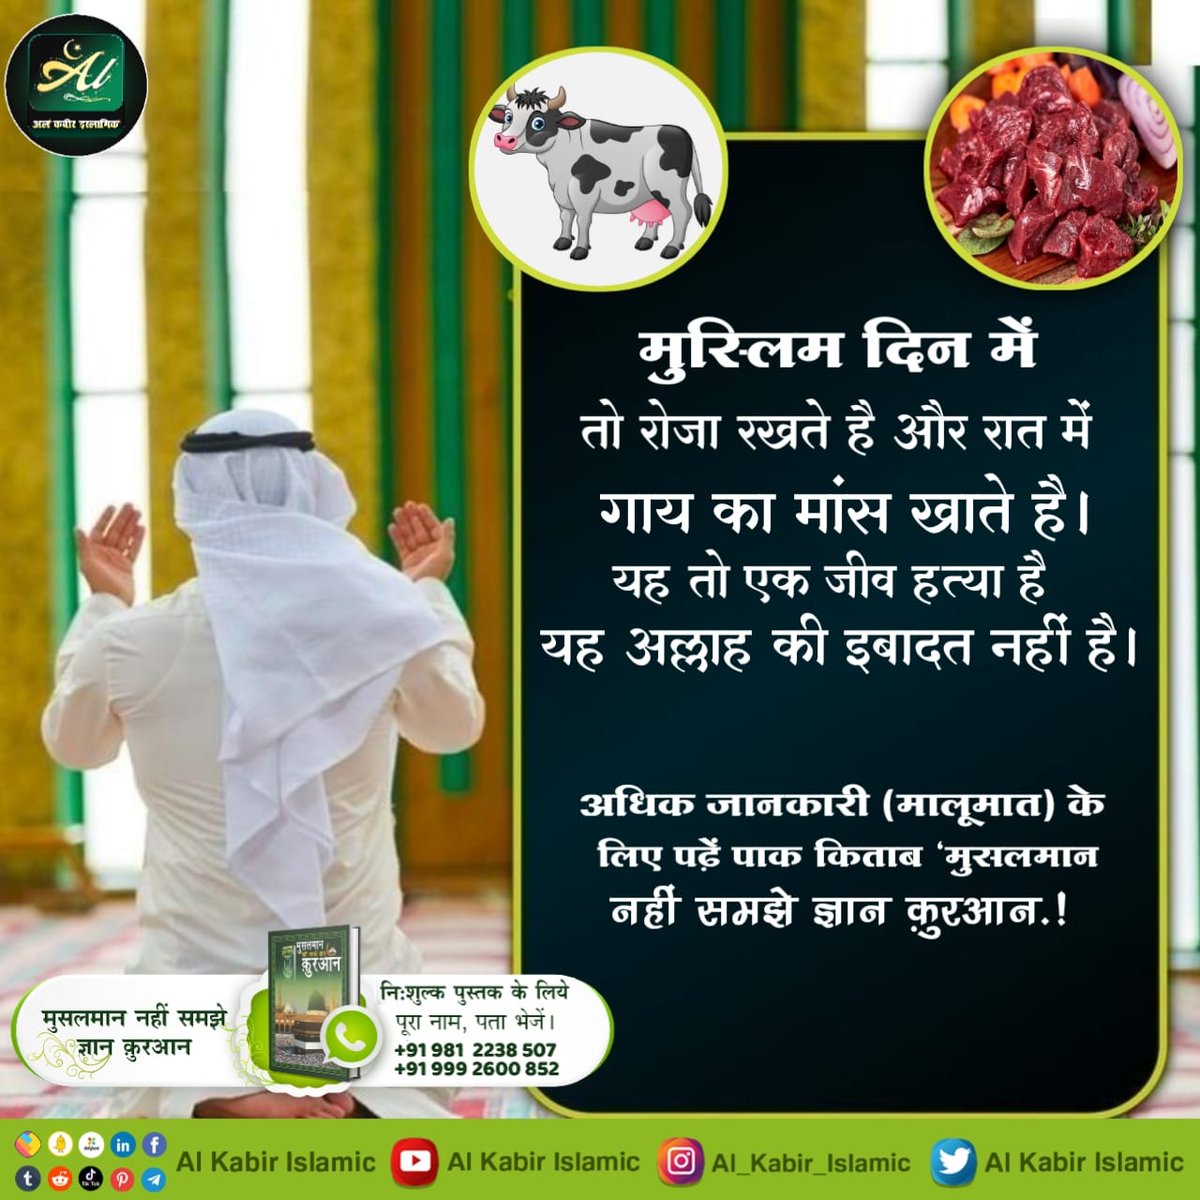 #रहम_करो_मूक_जीवों_पर Killing innocent animals is a sin! Muslims say that while fasting during the month of Ramzan, they refrain from any sinful activities. Did you even think that killing an innocent animal for food to break the fast, Is not a sin??